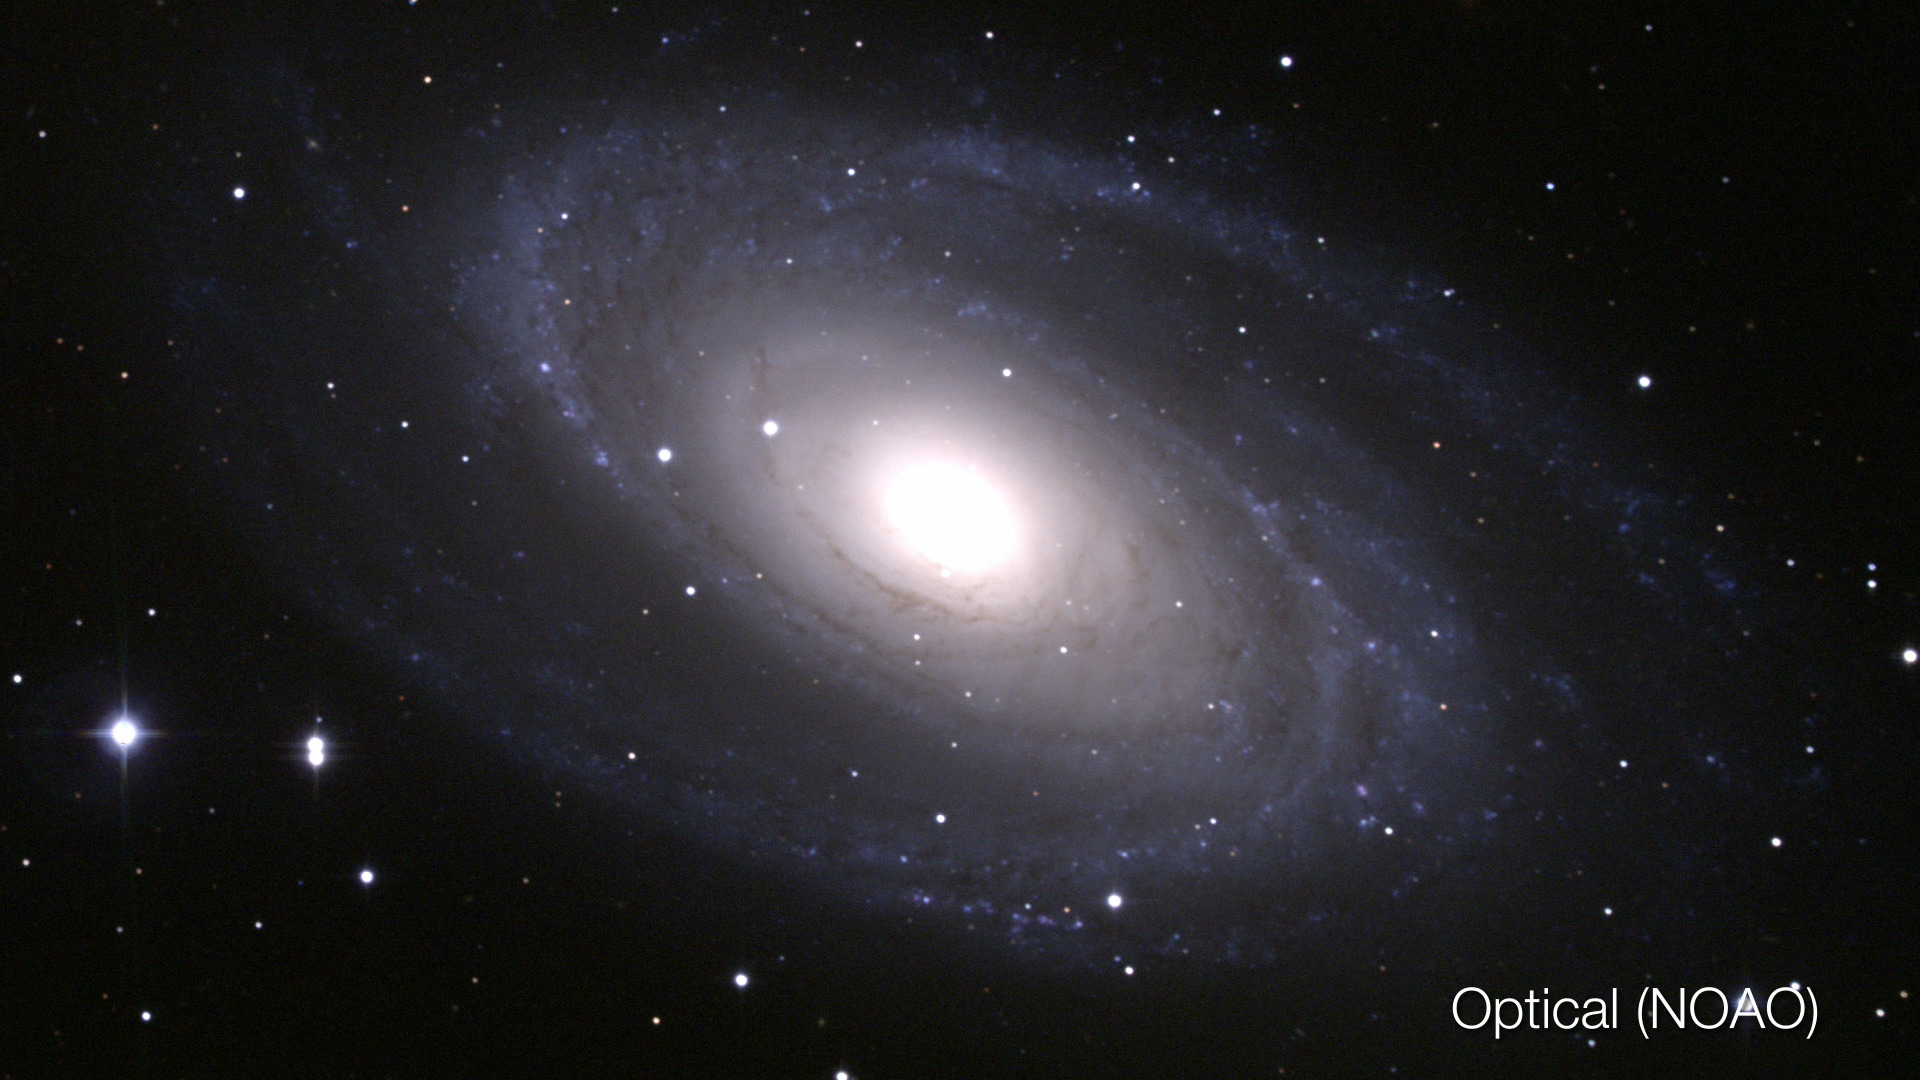 Star-forming regions in M81 become evident in infrared.